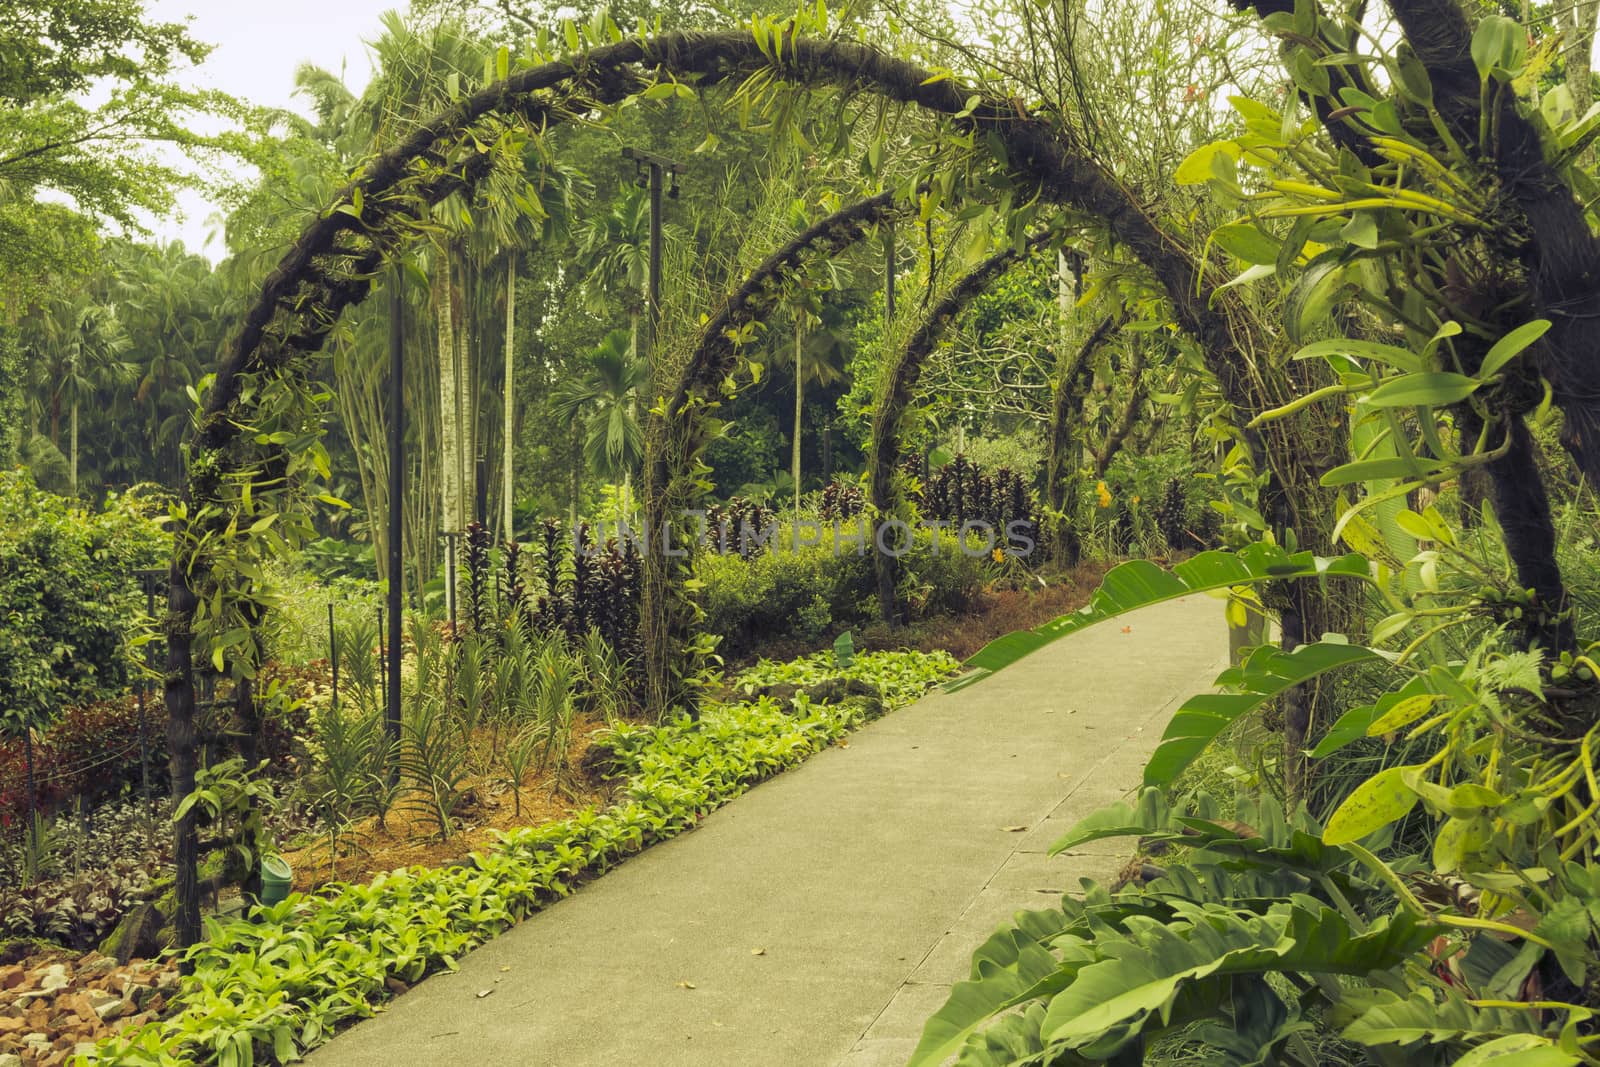 scenic pathway under artificial arches with plantation of orchid flowers in famous Singapore Botanical Gardens